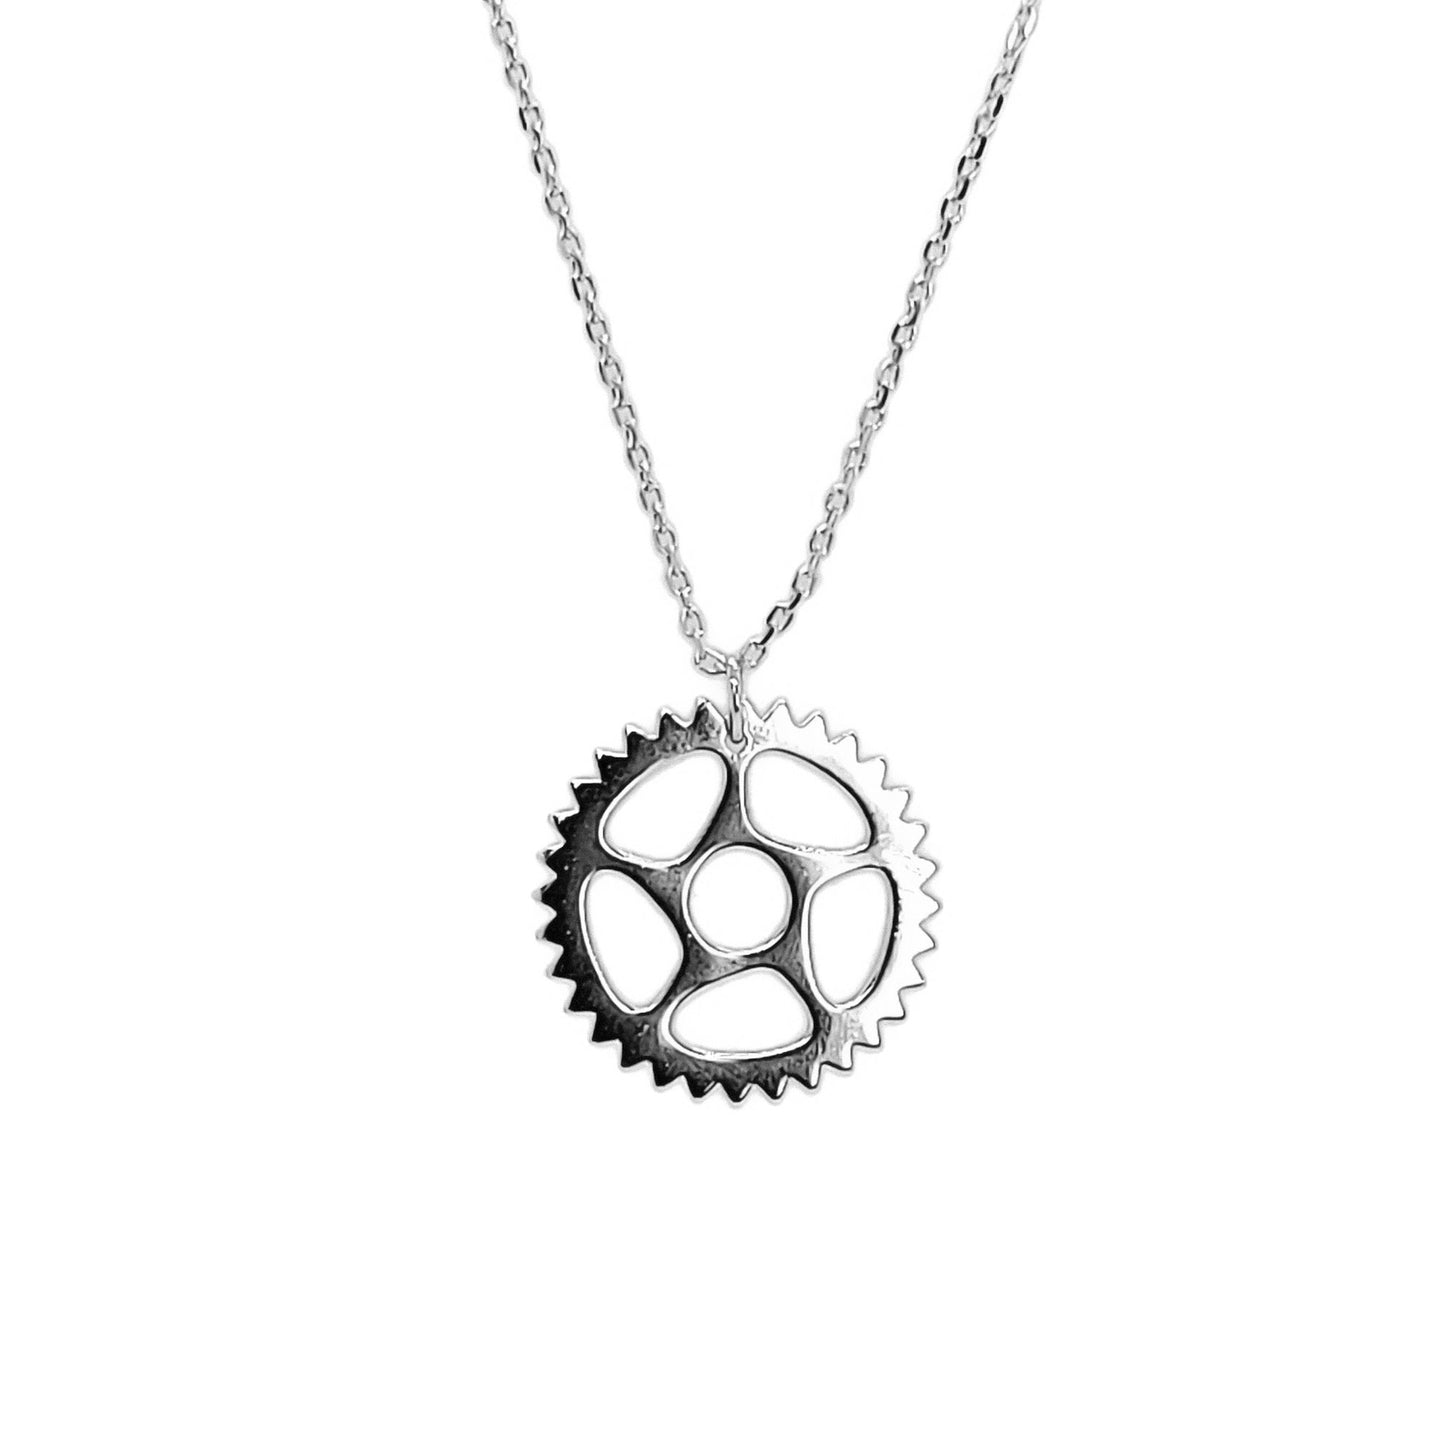 Maeve - Bike Chain Ring Necklace